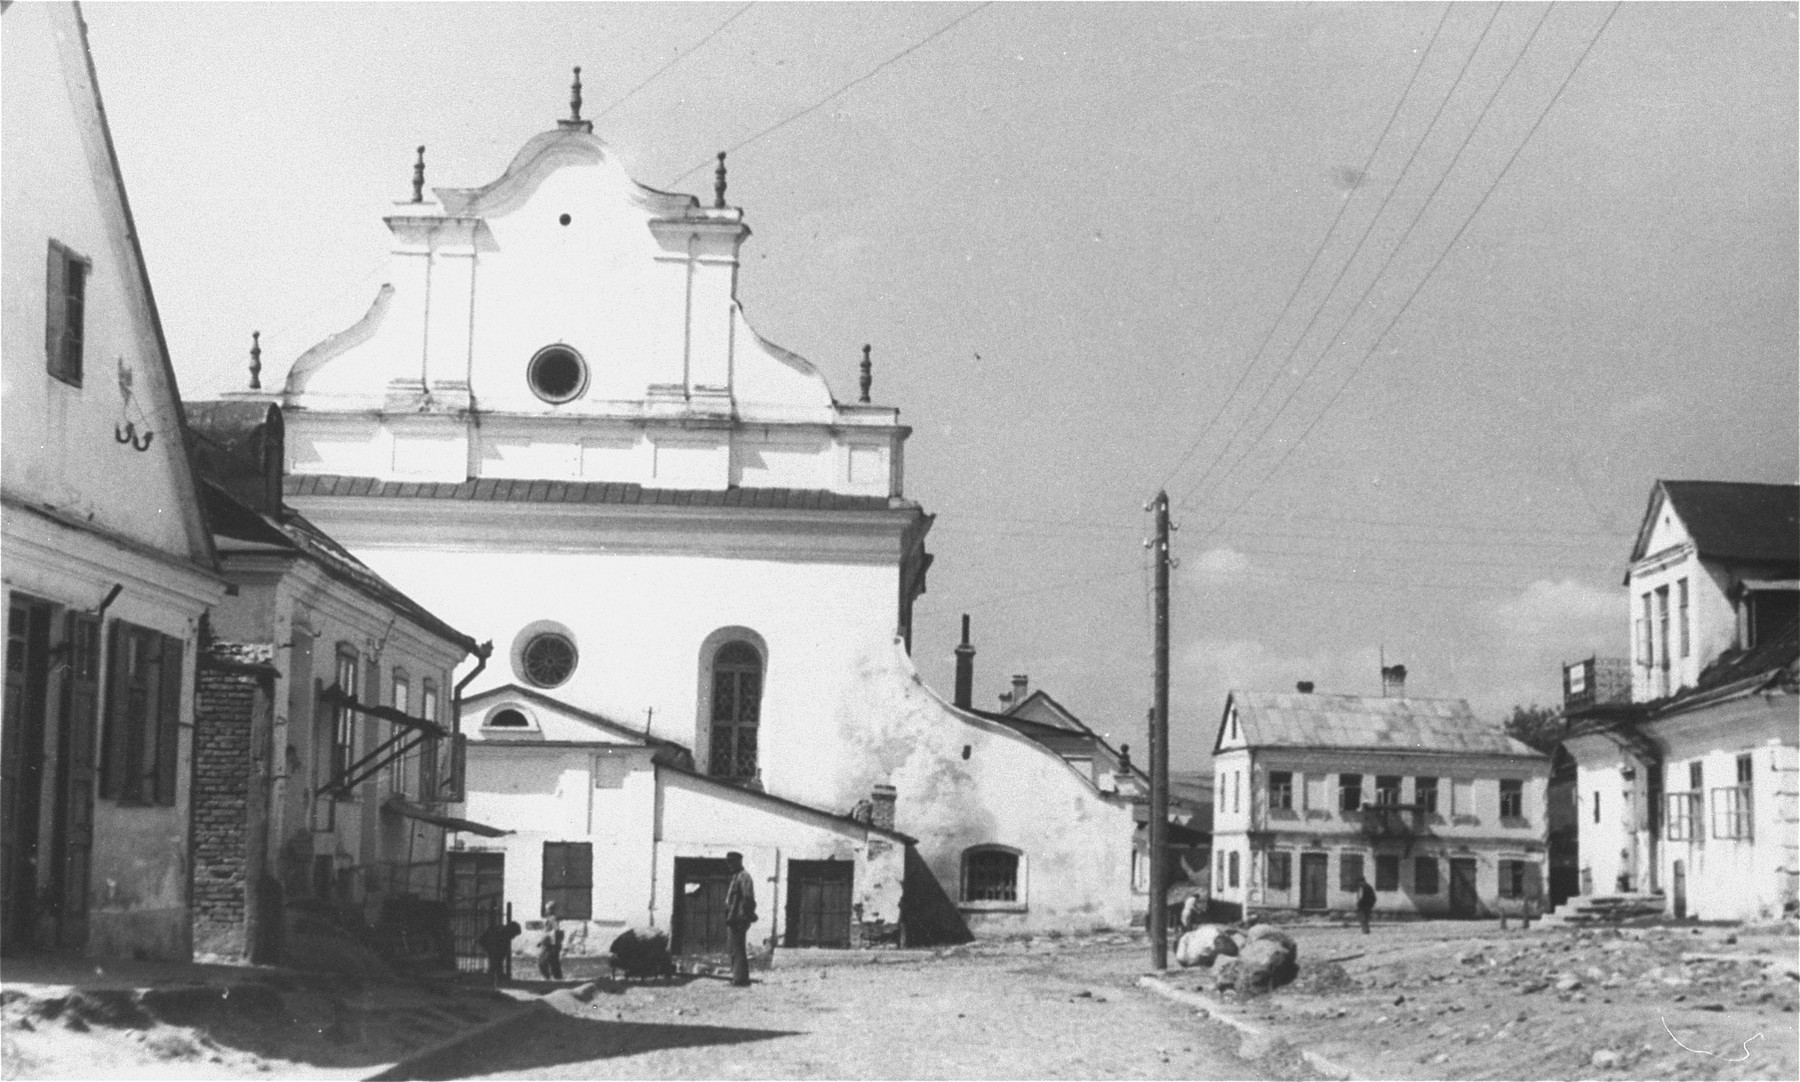 View of a street in Slonim which leads up to the main synagogue.